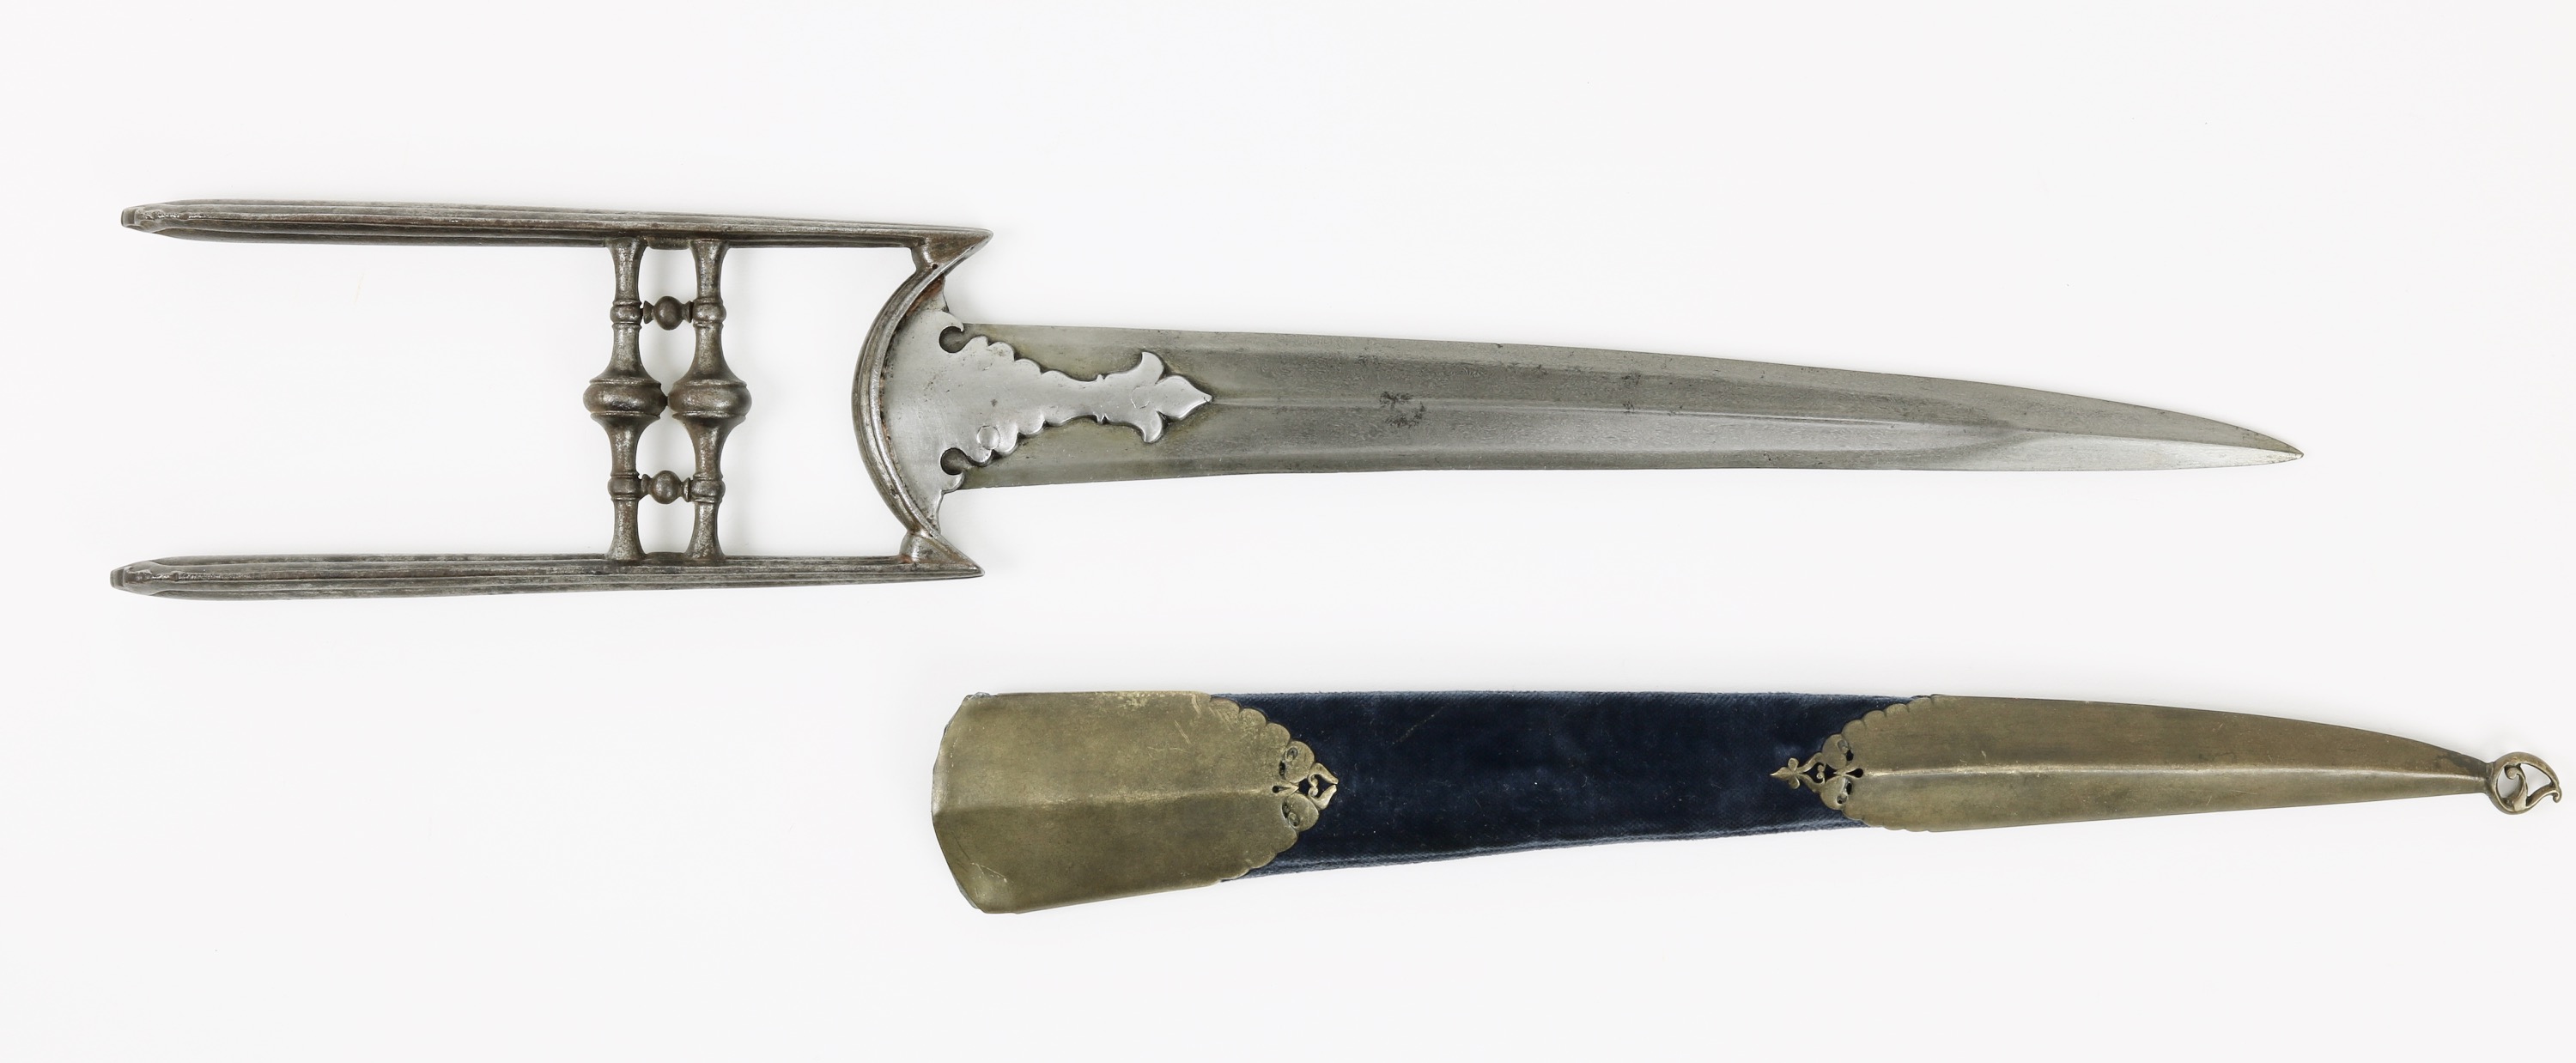 17th century katar with curved blade